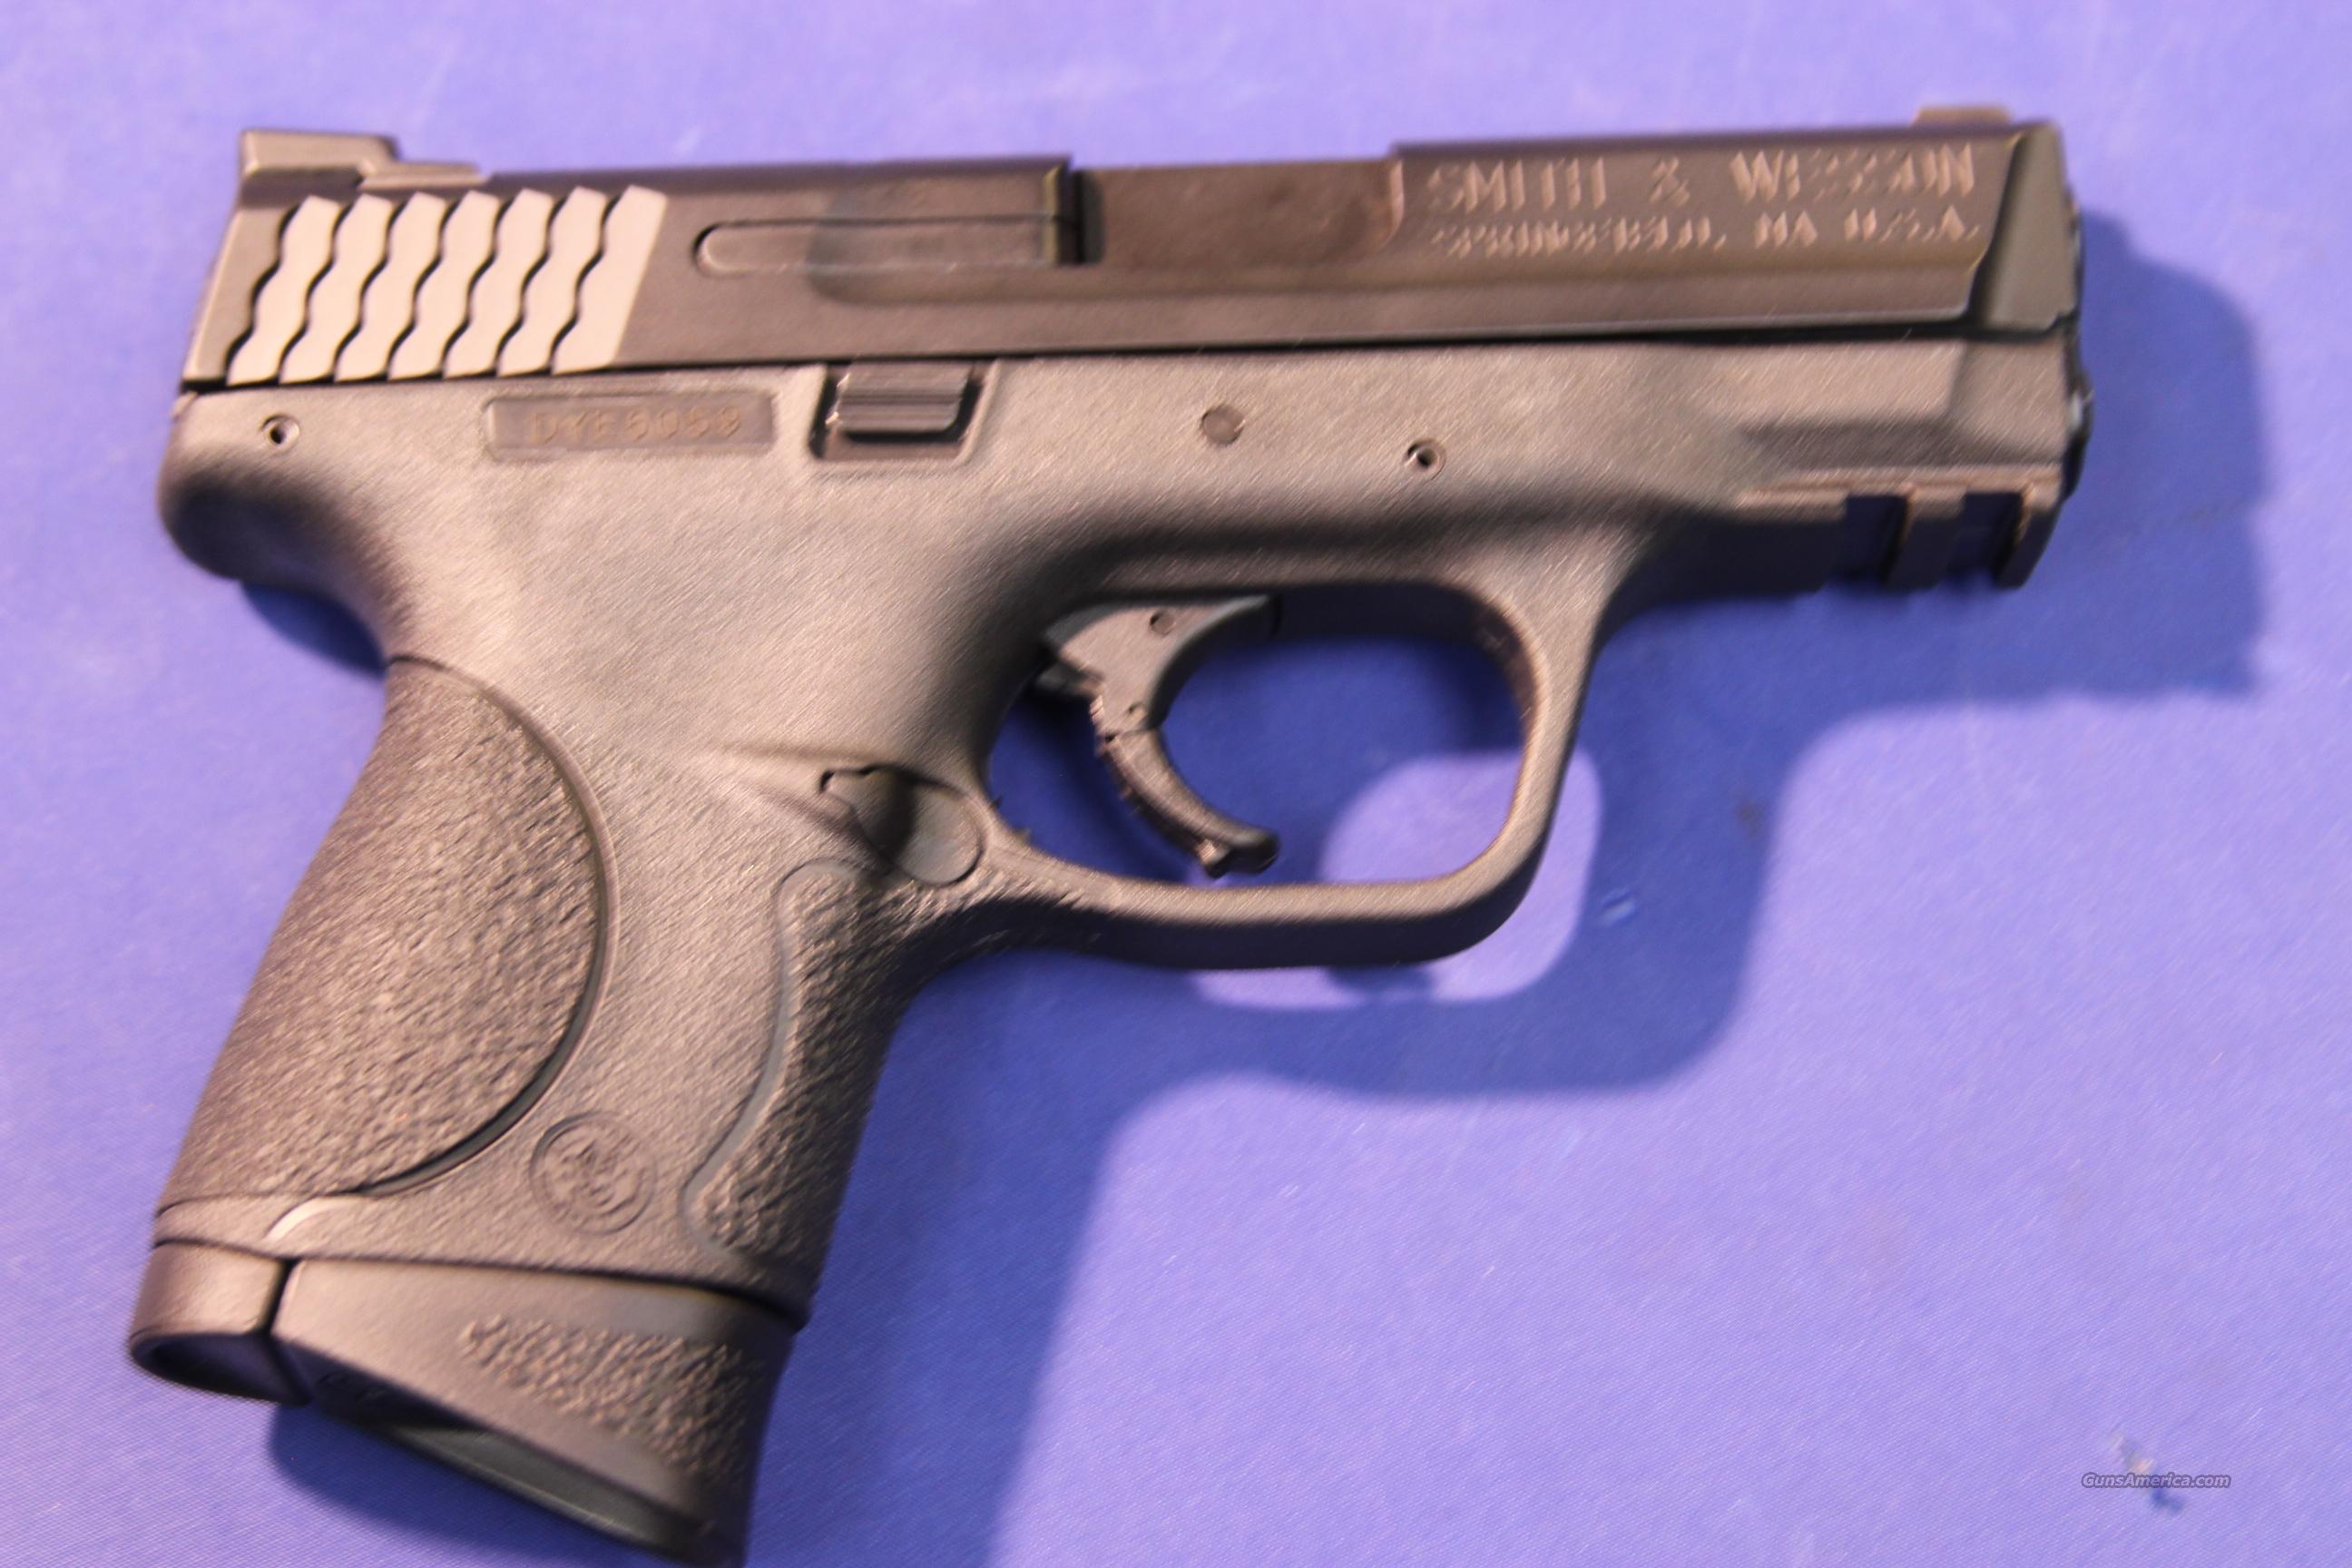 m and p compact 9mm